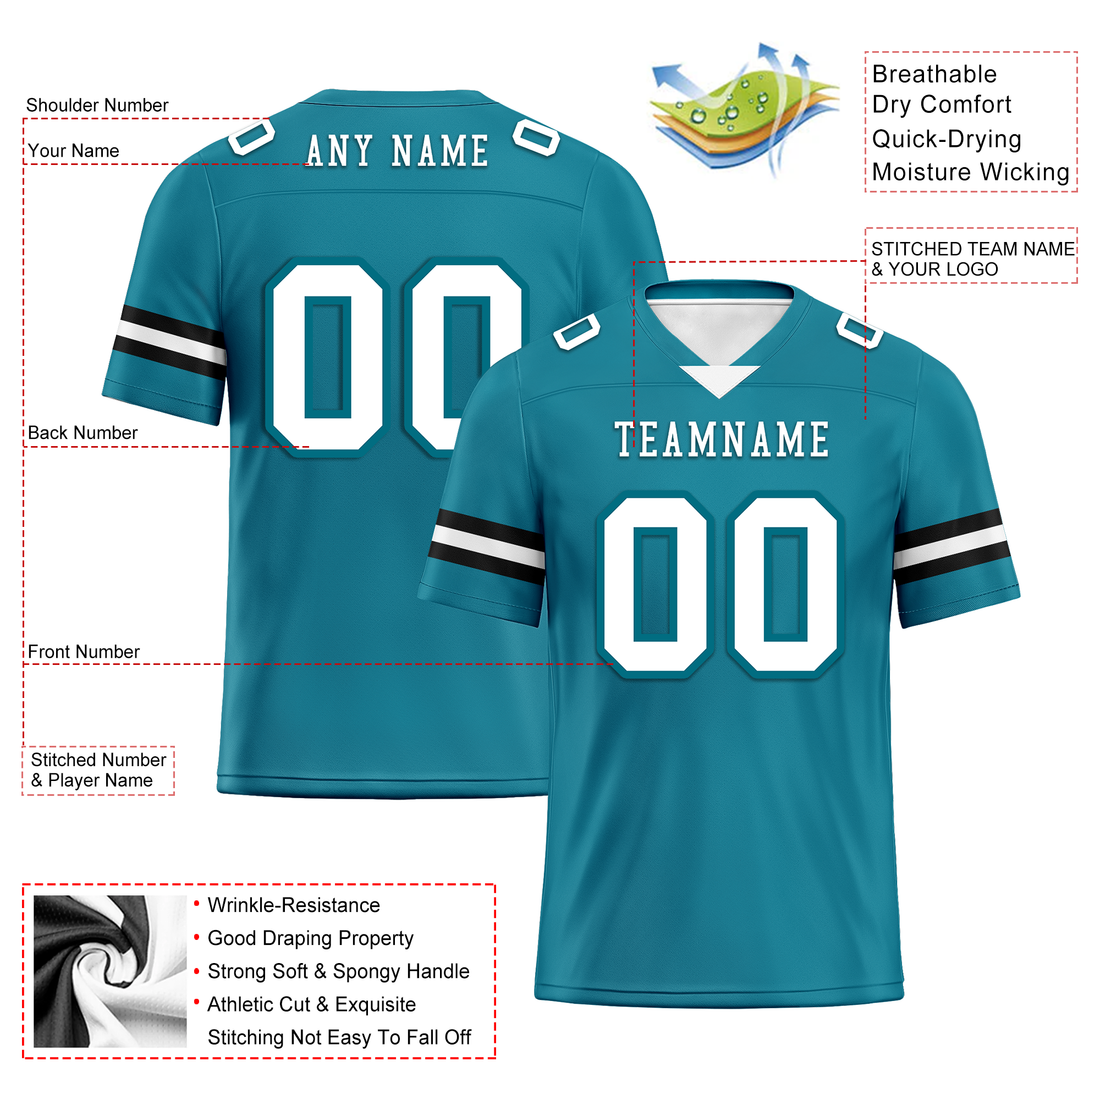 Custom Blue Classic Style Personalized Authentic Football Jersey FBJ02-bd0a70be